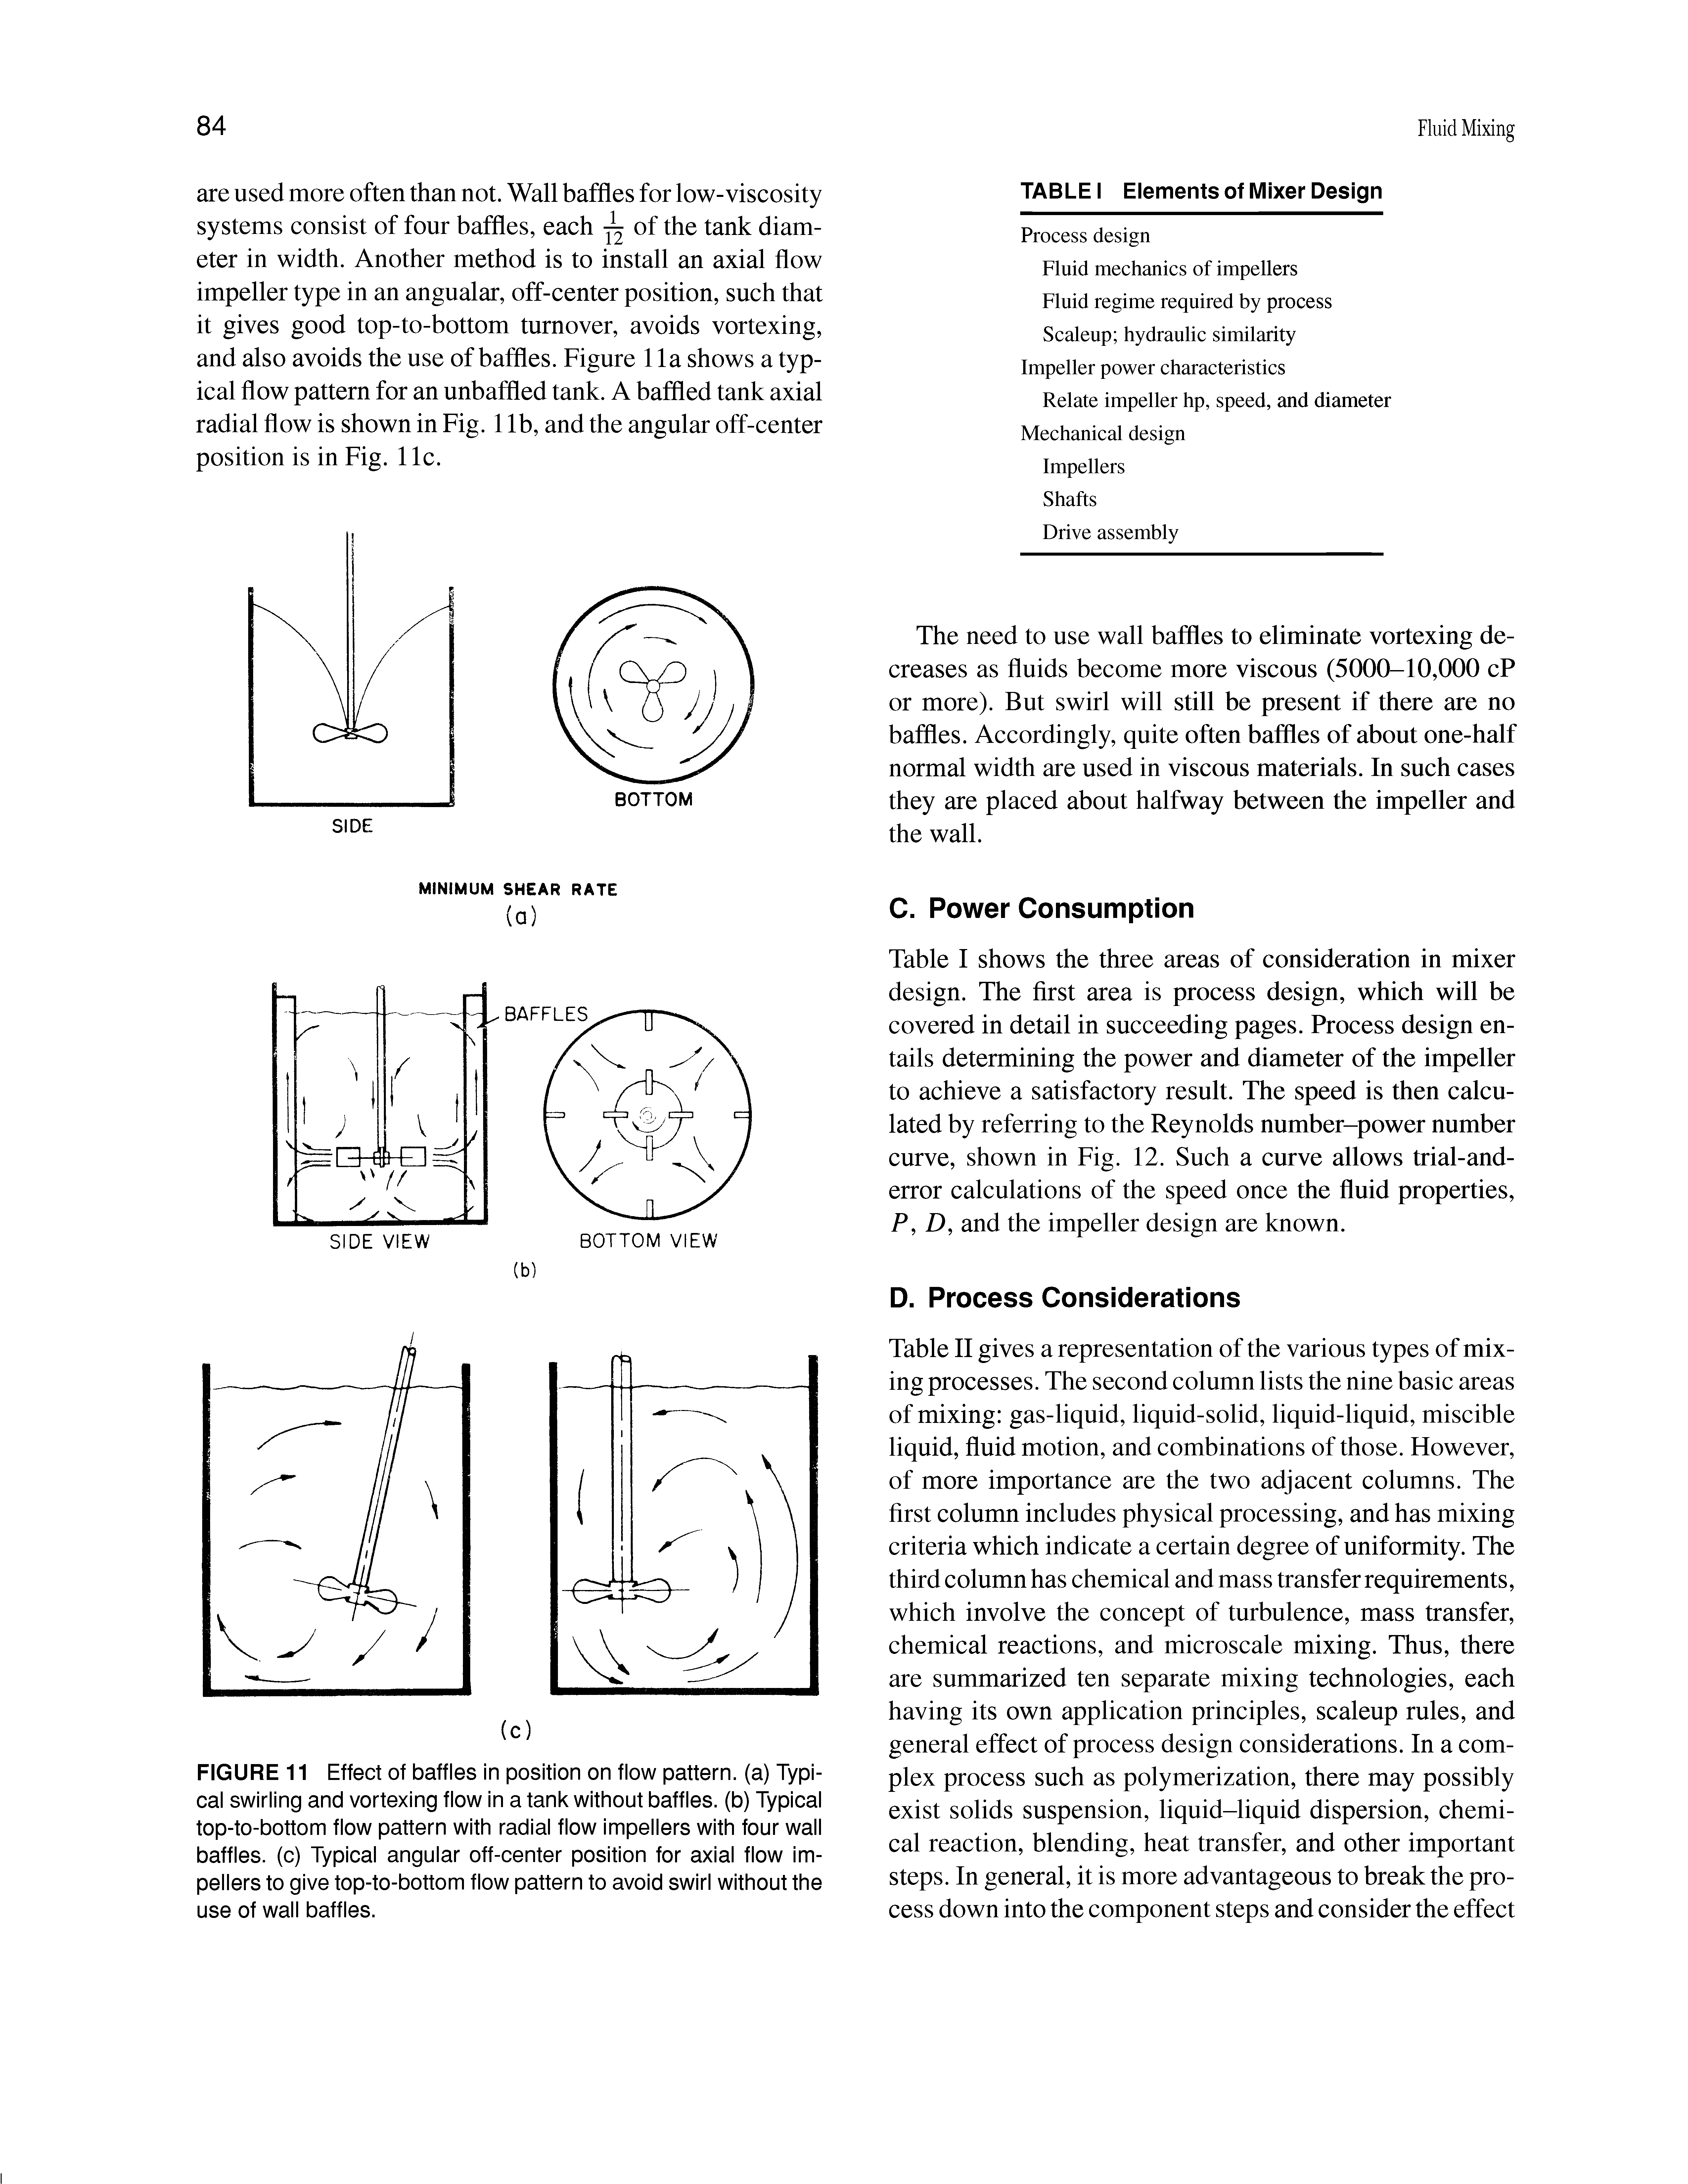 Table I shows the three areas of consideration in mixer design. The first area is process design, which will be covered in detail in succeeding pages. Process design entails determining the power and diameter of the impeller to achieve a satisfactory result. The speed is then calculated by referring to the Reynolds number-power number curve, shown in Fig. 12. Such a curve allows trial-and-error calculations of the speed once the fluid properties, P, D, and the impeller design are known.